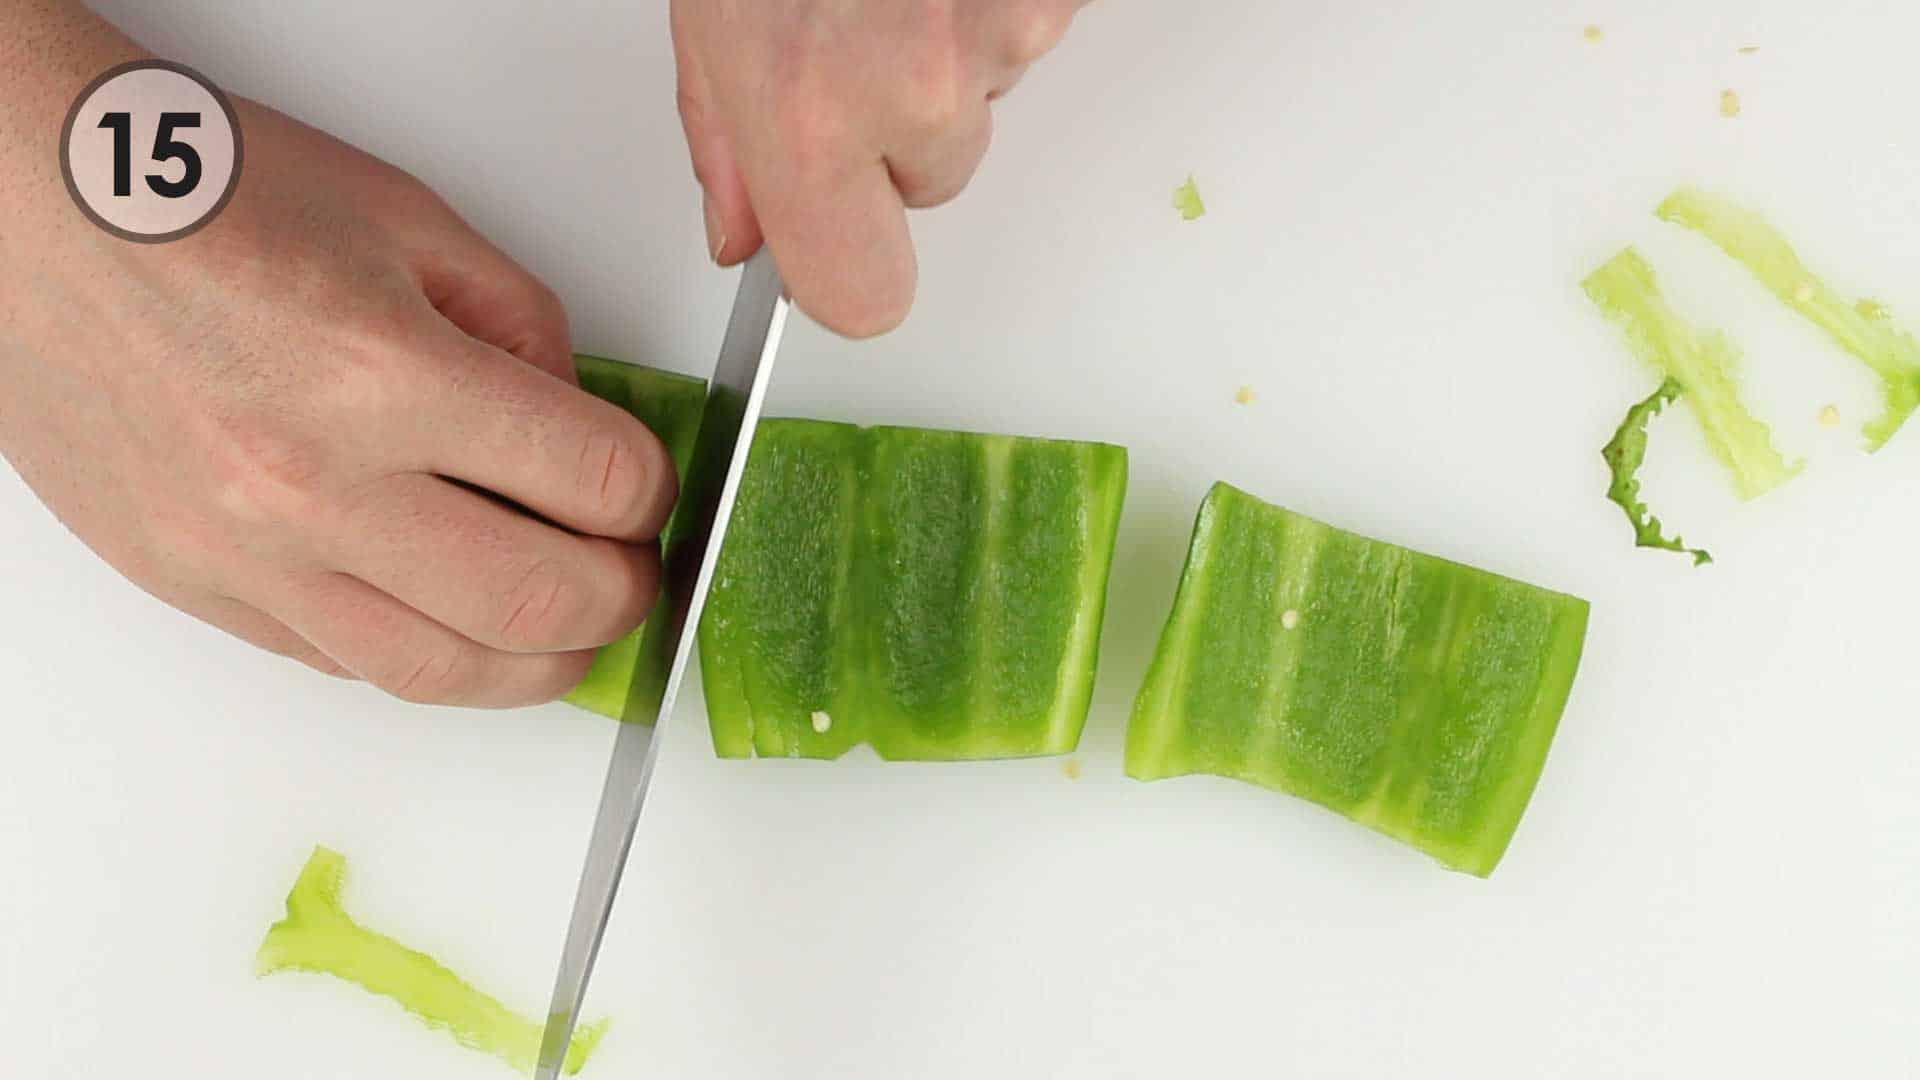 Step 15. Cutting three smaller sheets from the long sheet of pepper.